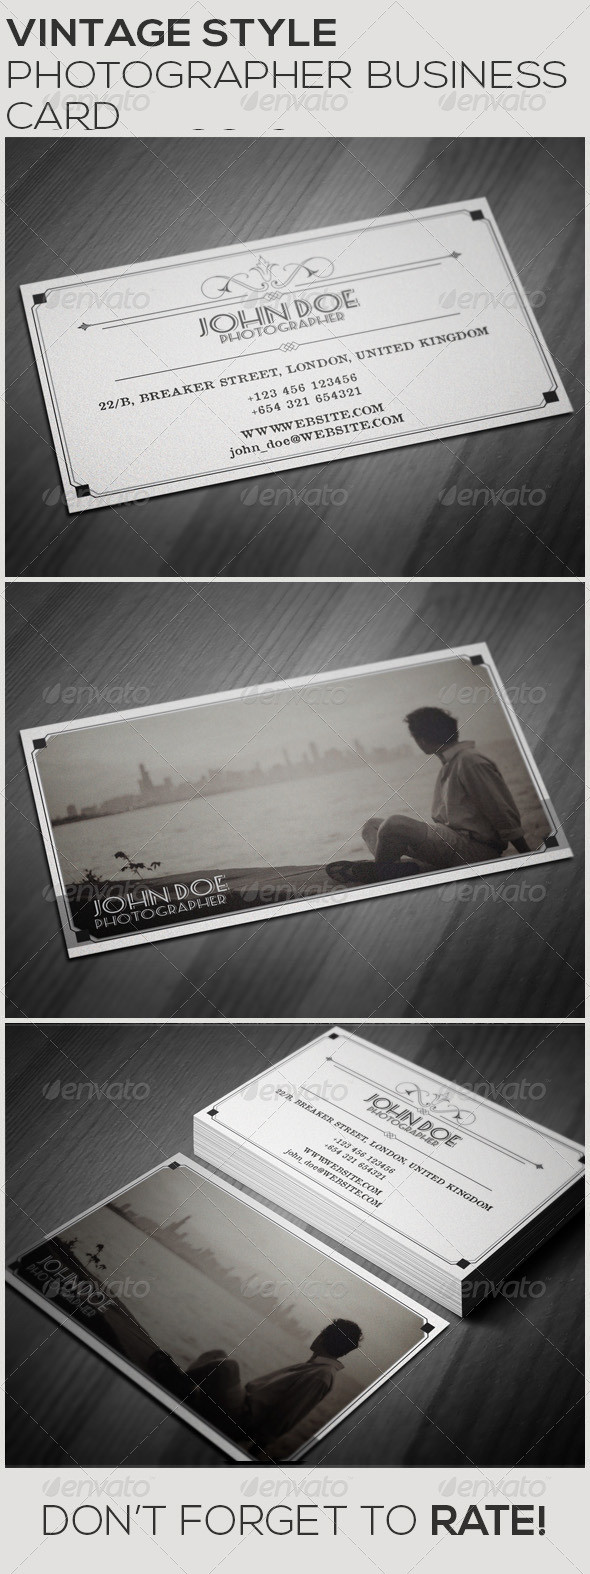 Preview vintage photography business card